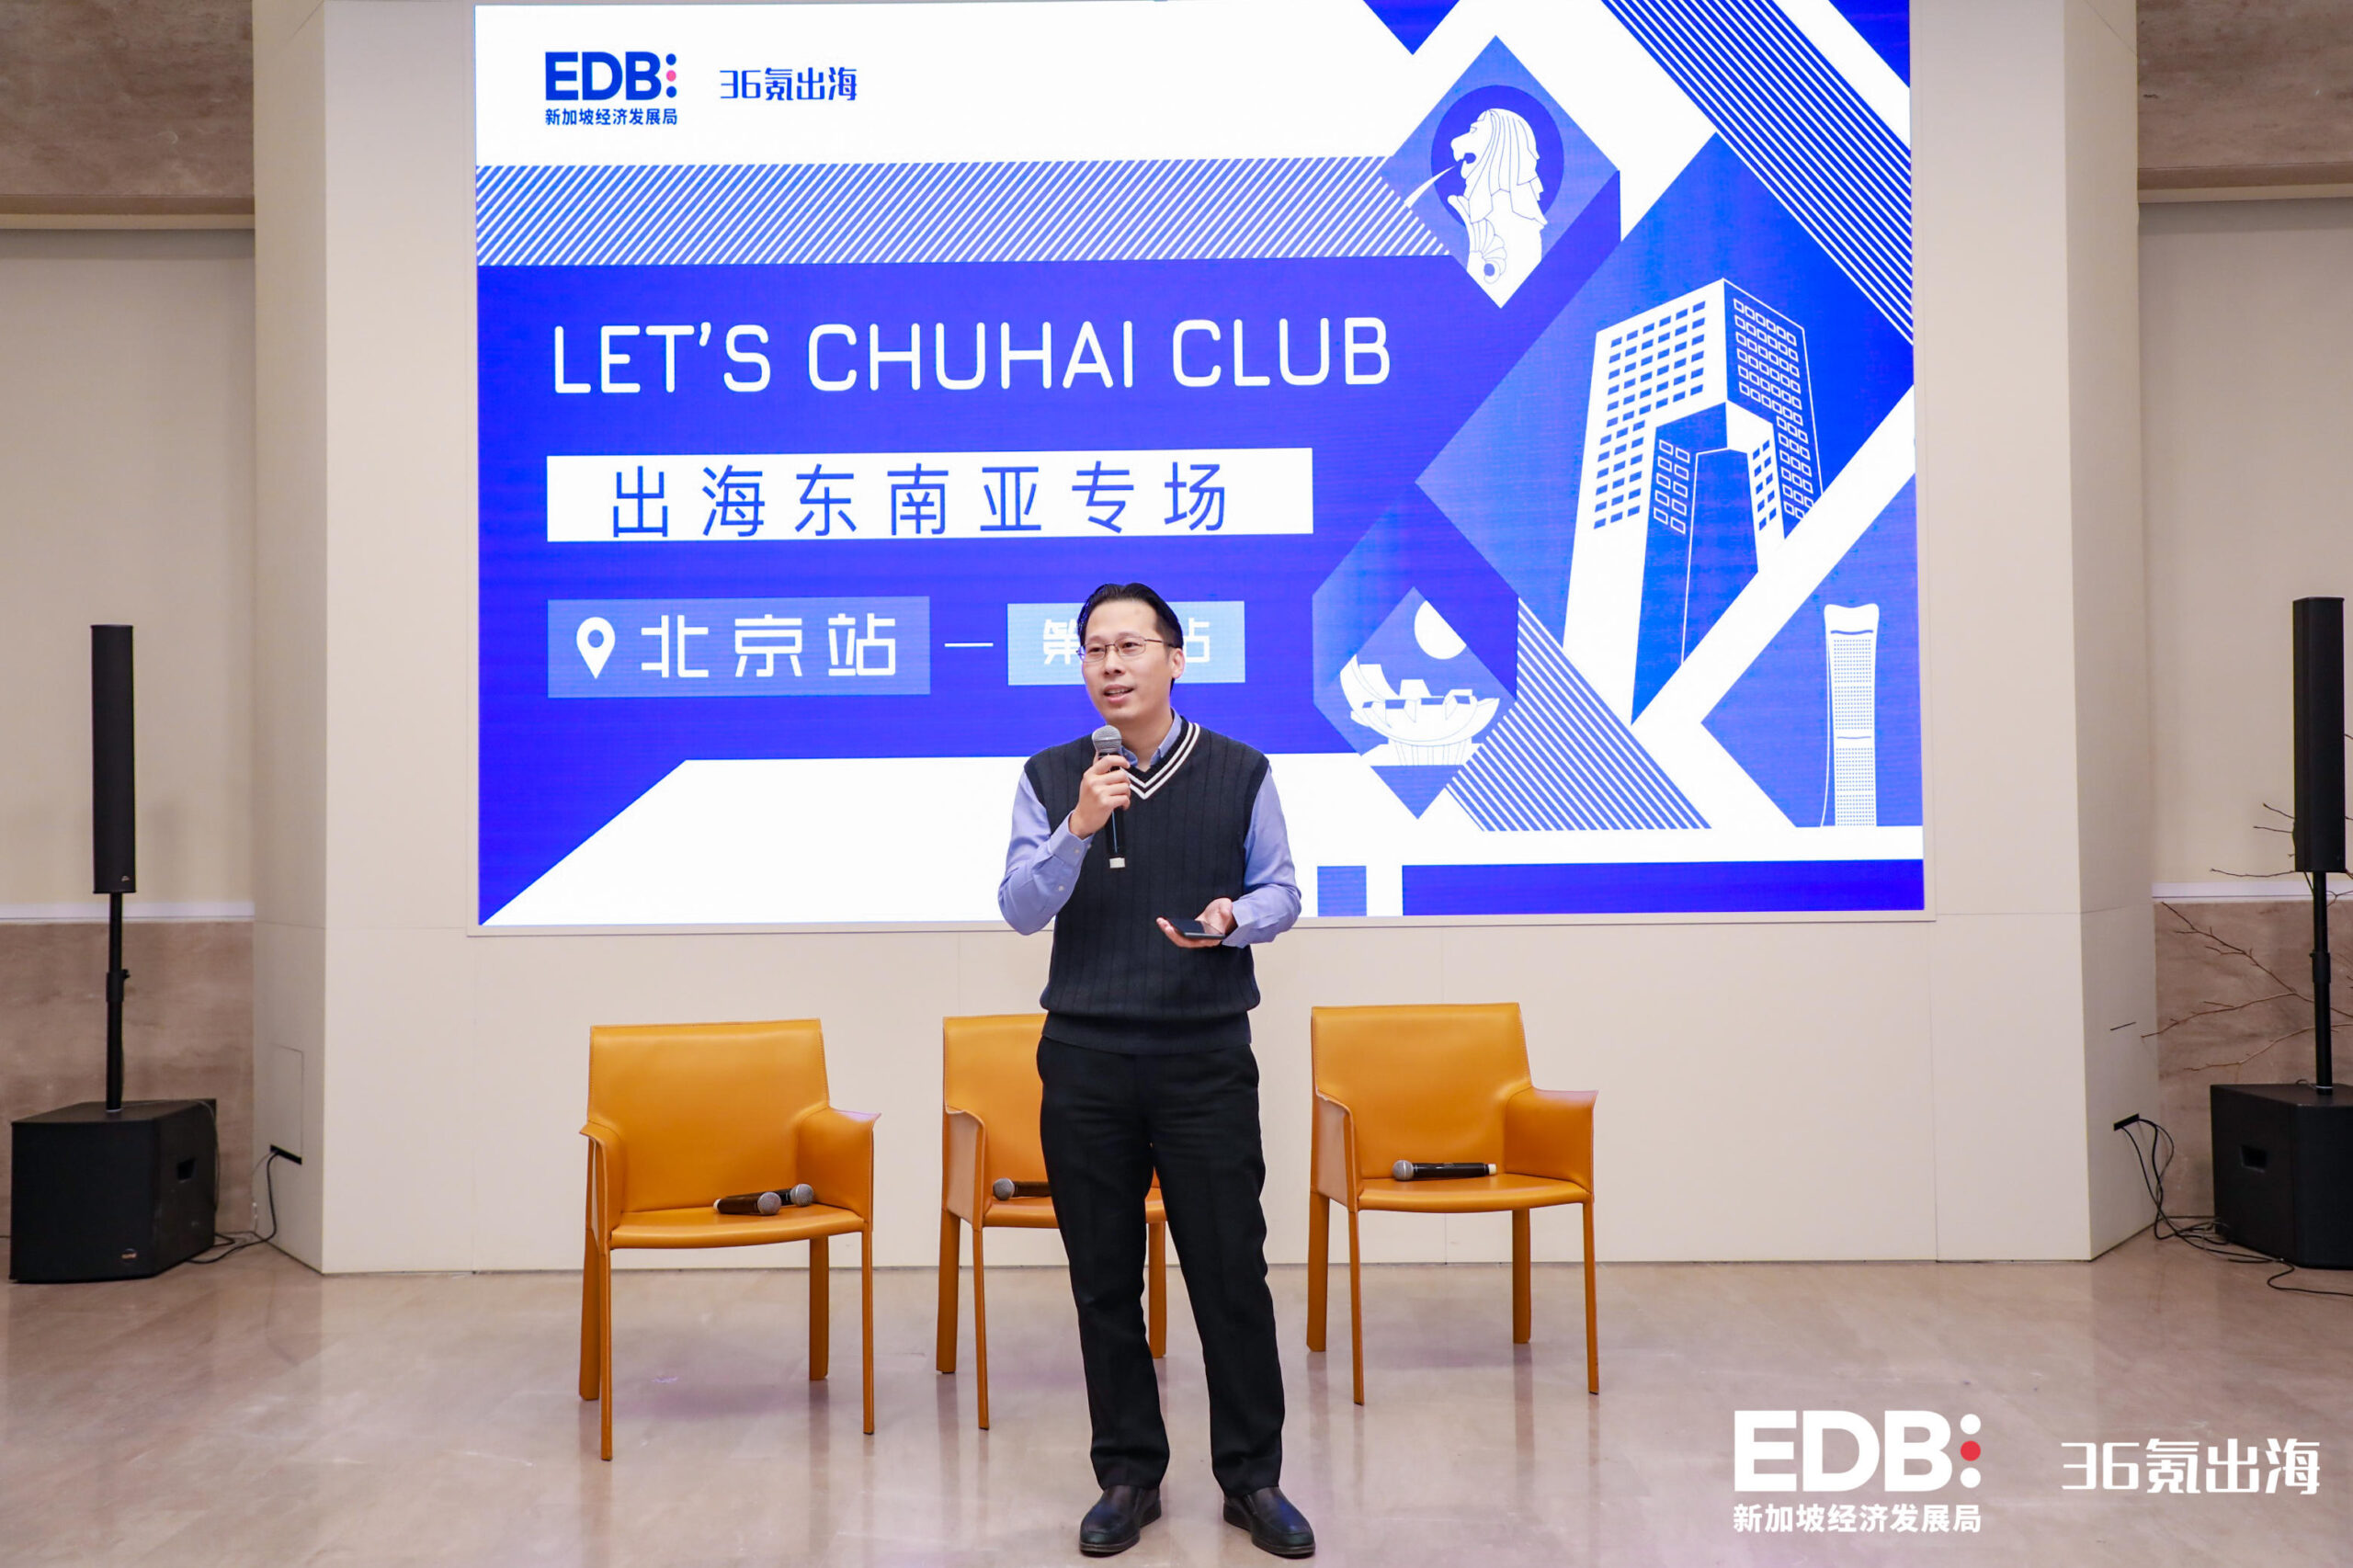 B2b Activity Review | LET'S CHUHAI CLUB Sailing to Southeast Asia Salon - Learning Notes at Beijing Station